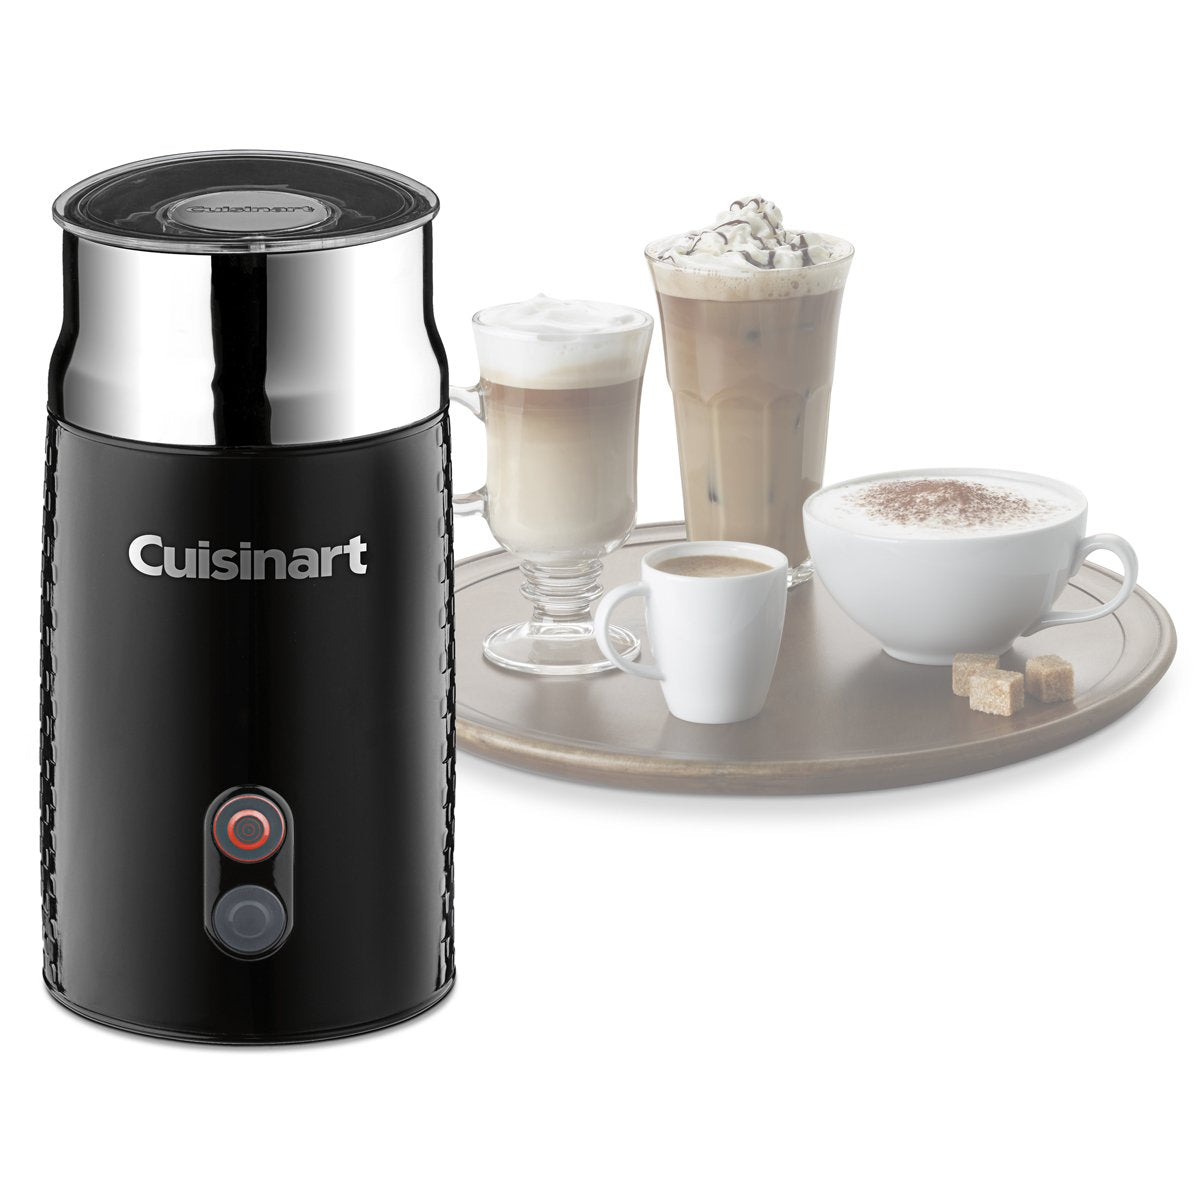 CUISINART Tazzaccino Milk Frother, FR-10C, Black – OneDealOutlet Featured  Deals